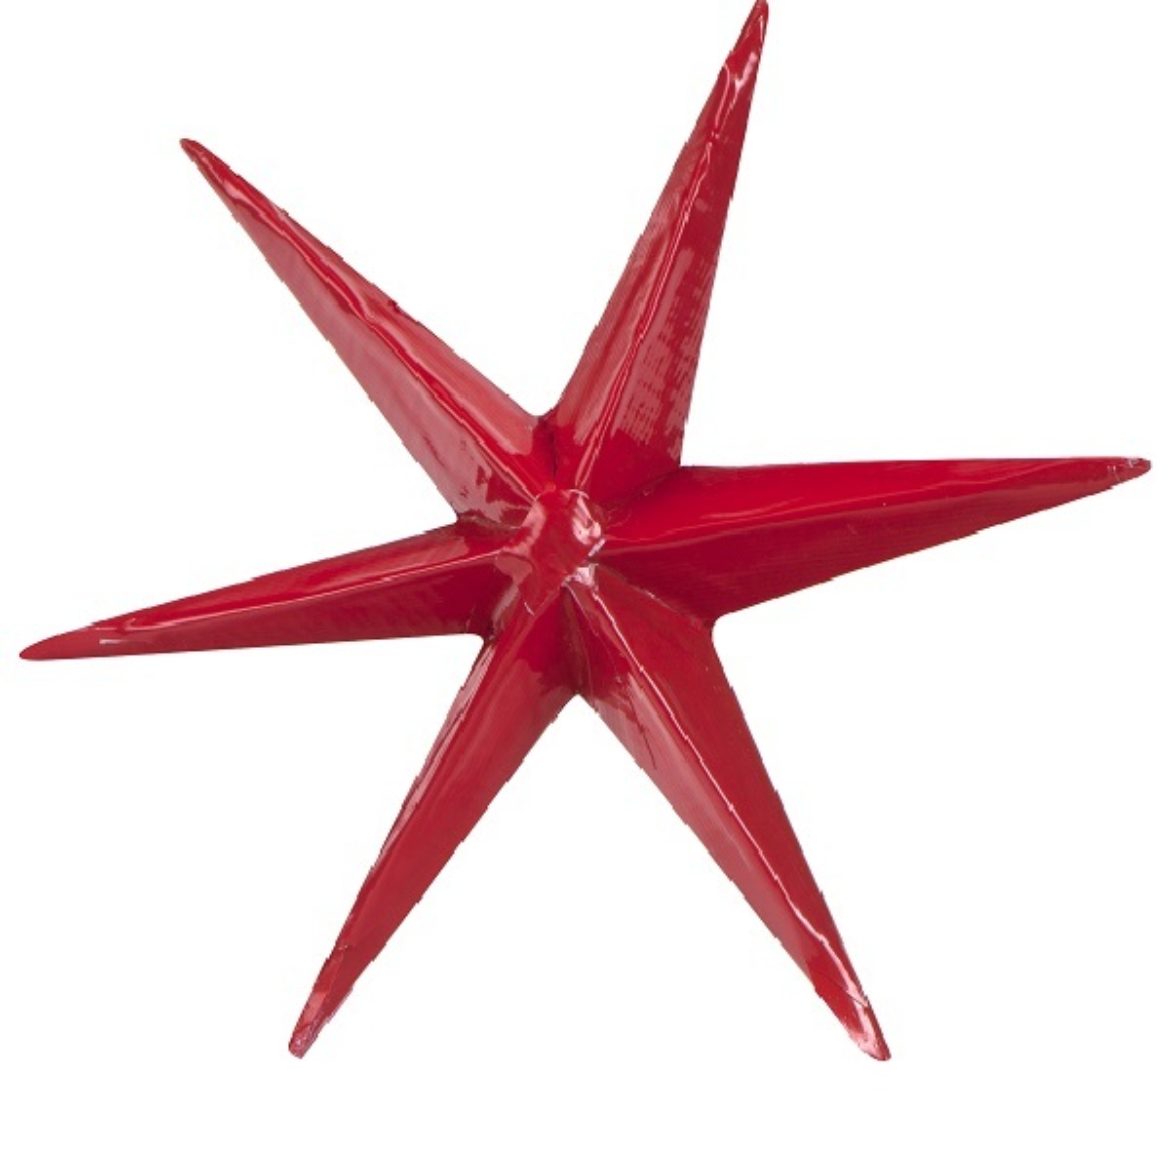 Completed Duck Tape Star made with Red Duck Tape